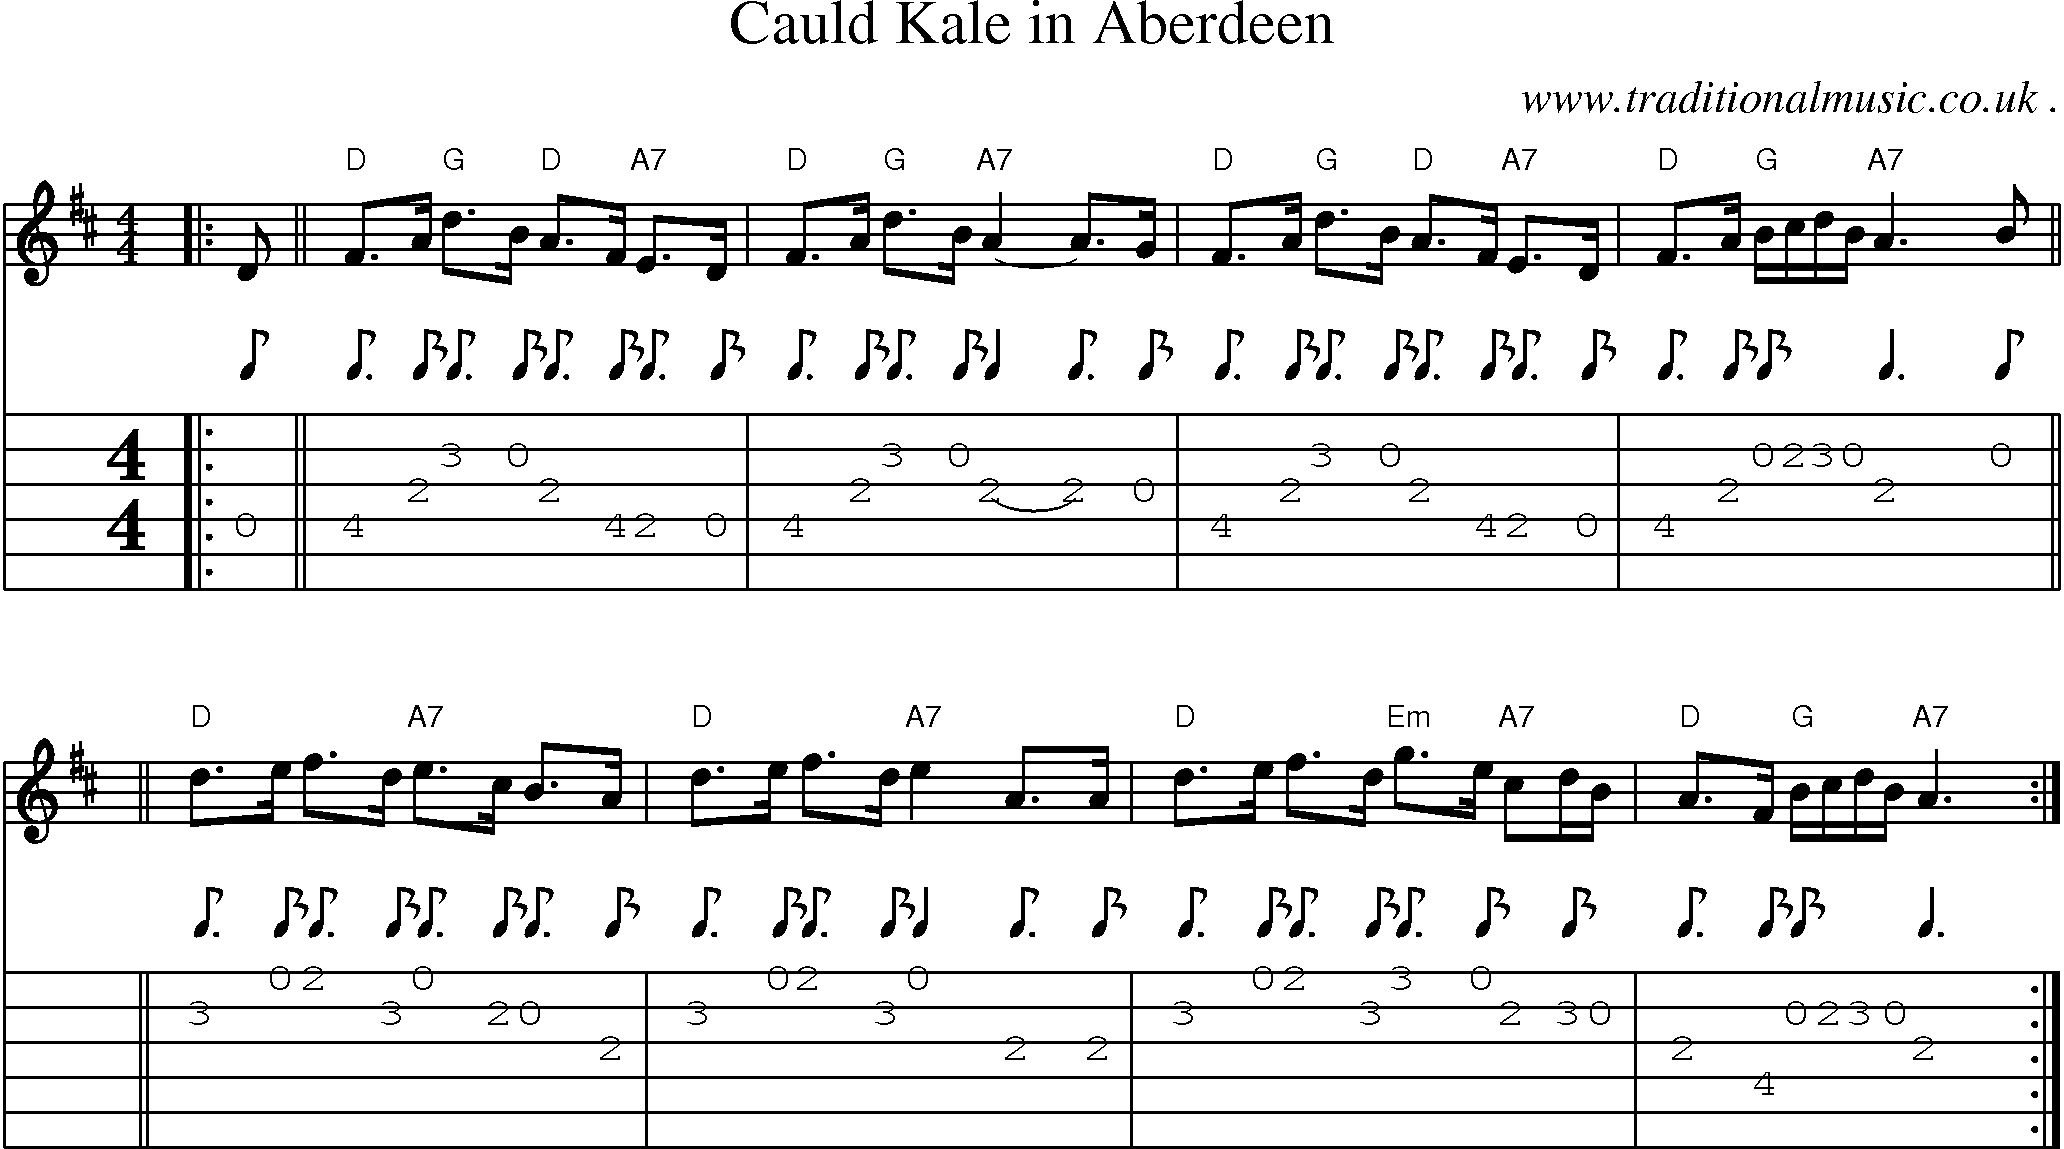 Sheet-music  score, Chords and Guitar Tabs for Cauld Kale In Aberdeen